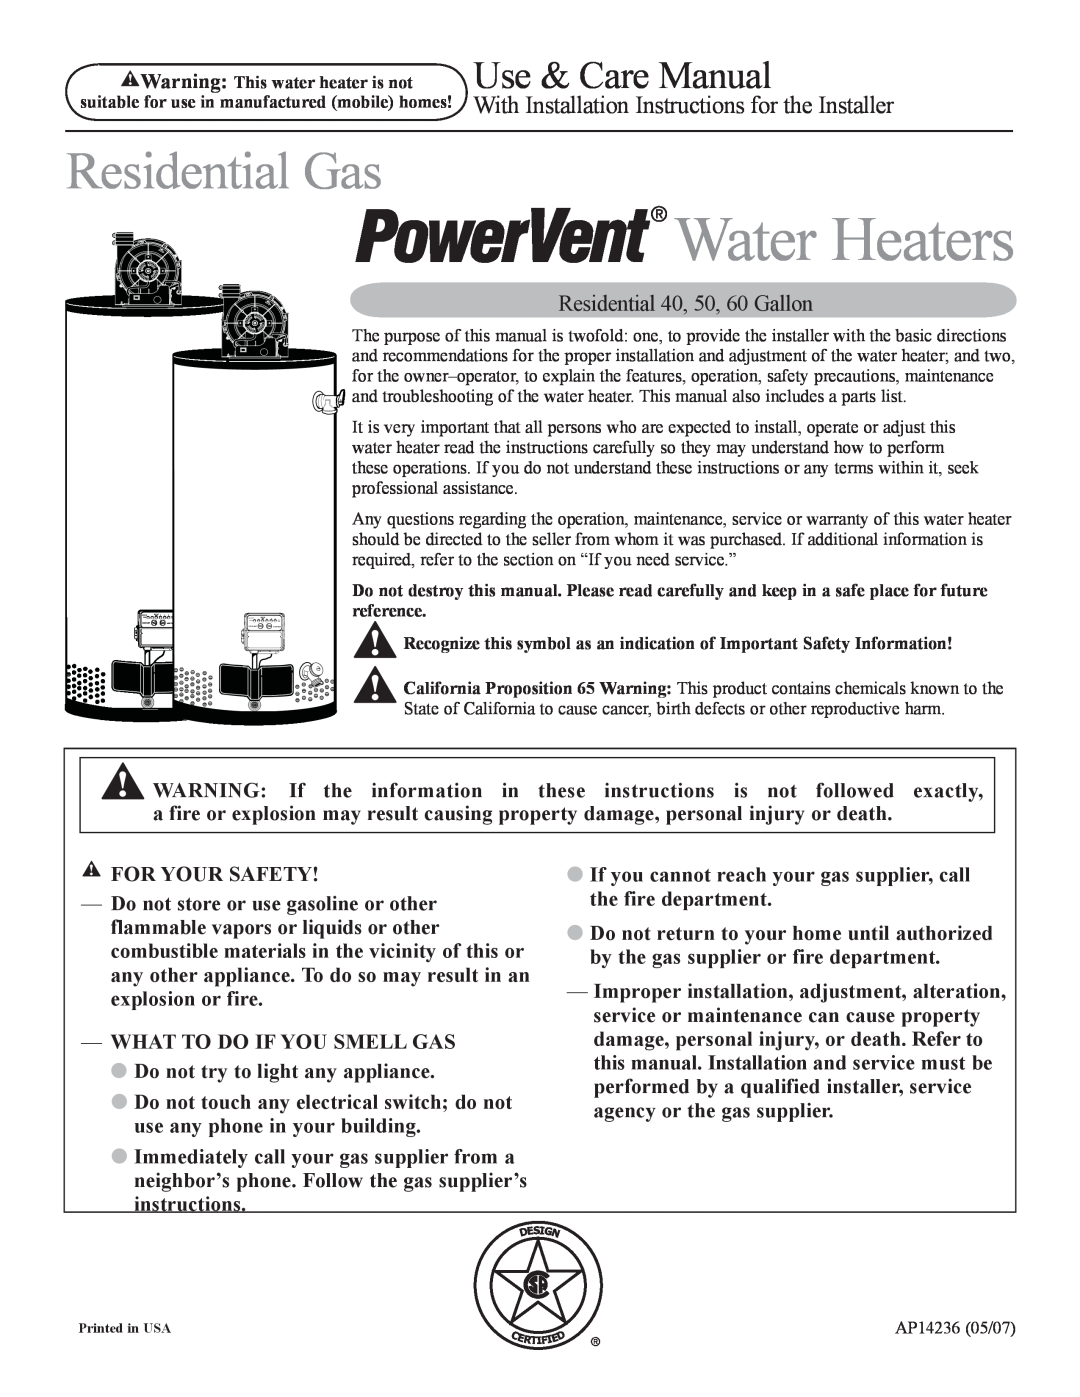 Ruud AP14236 installation instructions With Installation Instructions for the Installer, Water Heaters, Residential Gas 